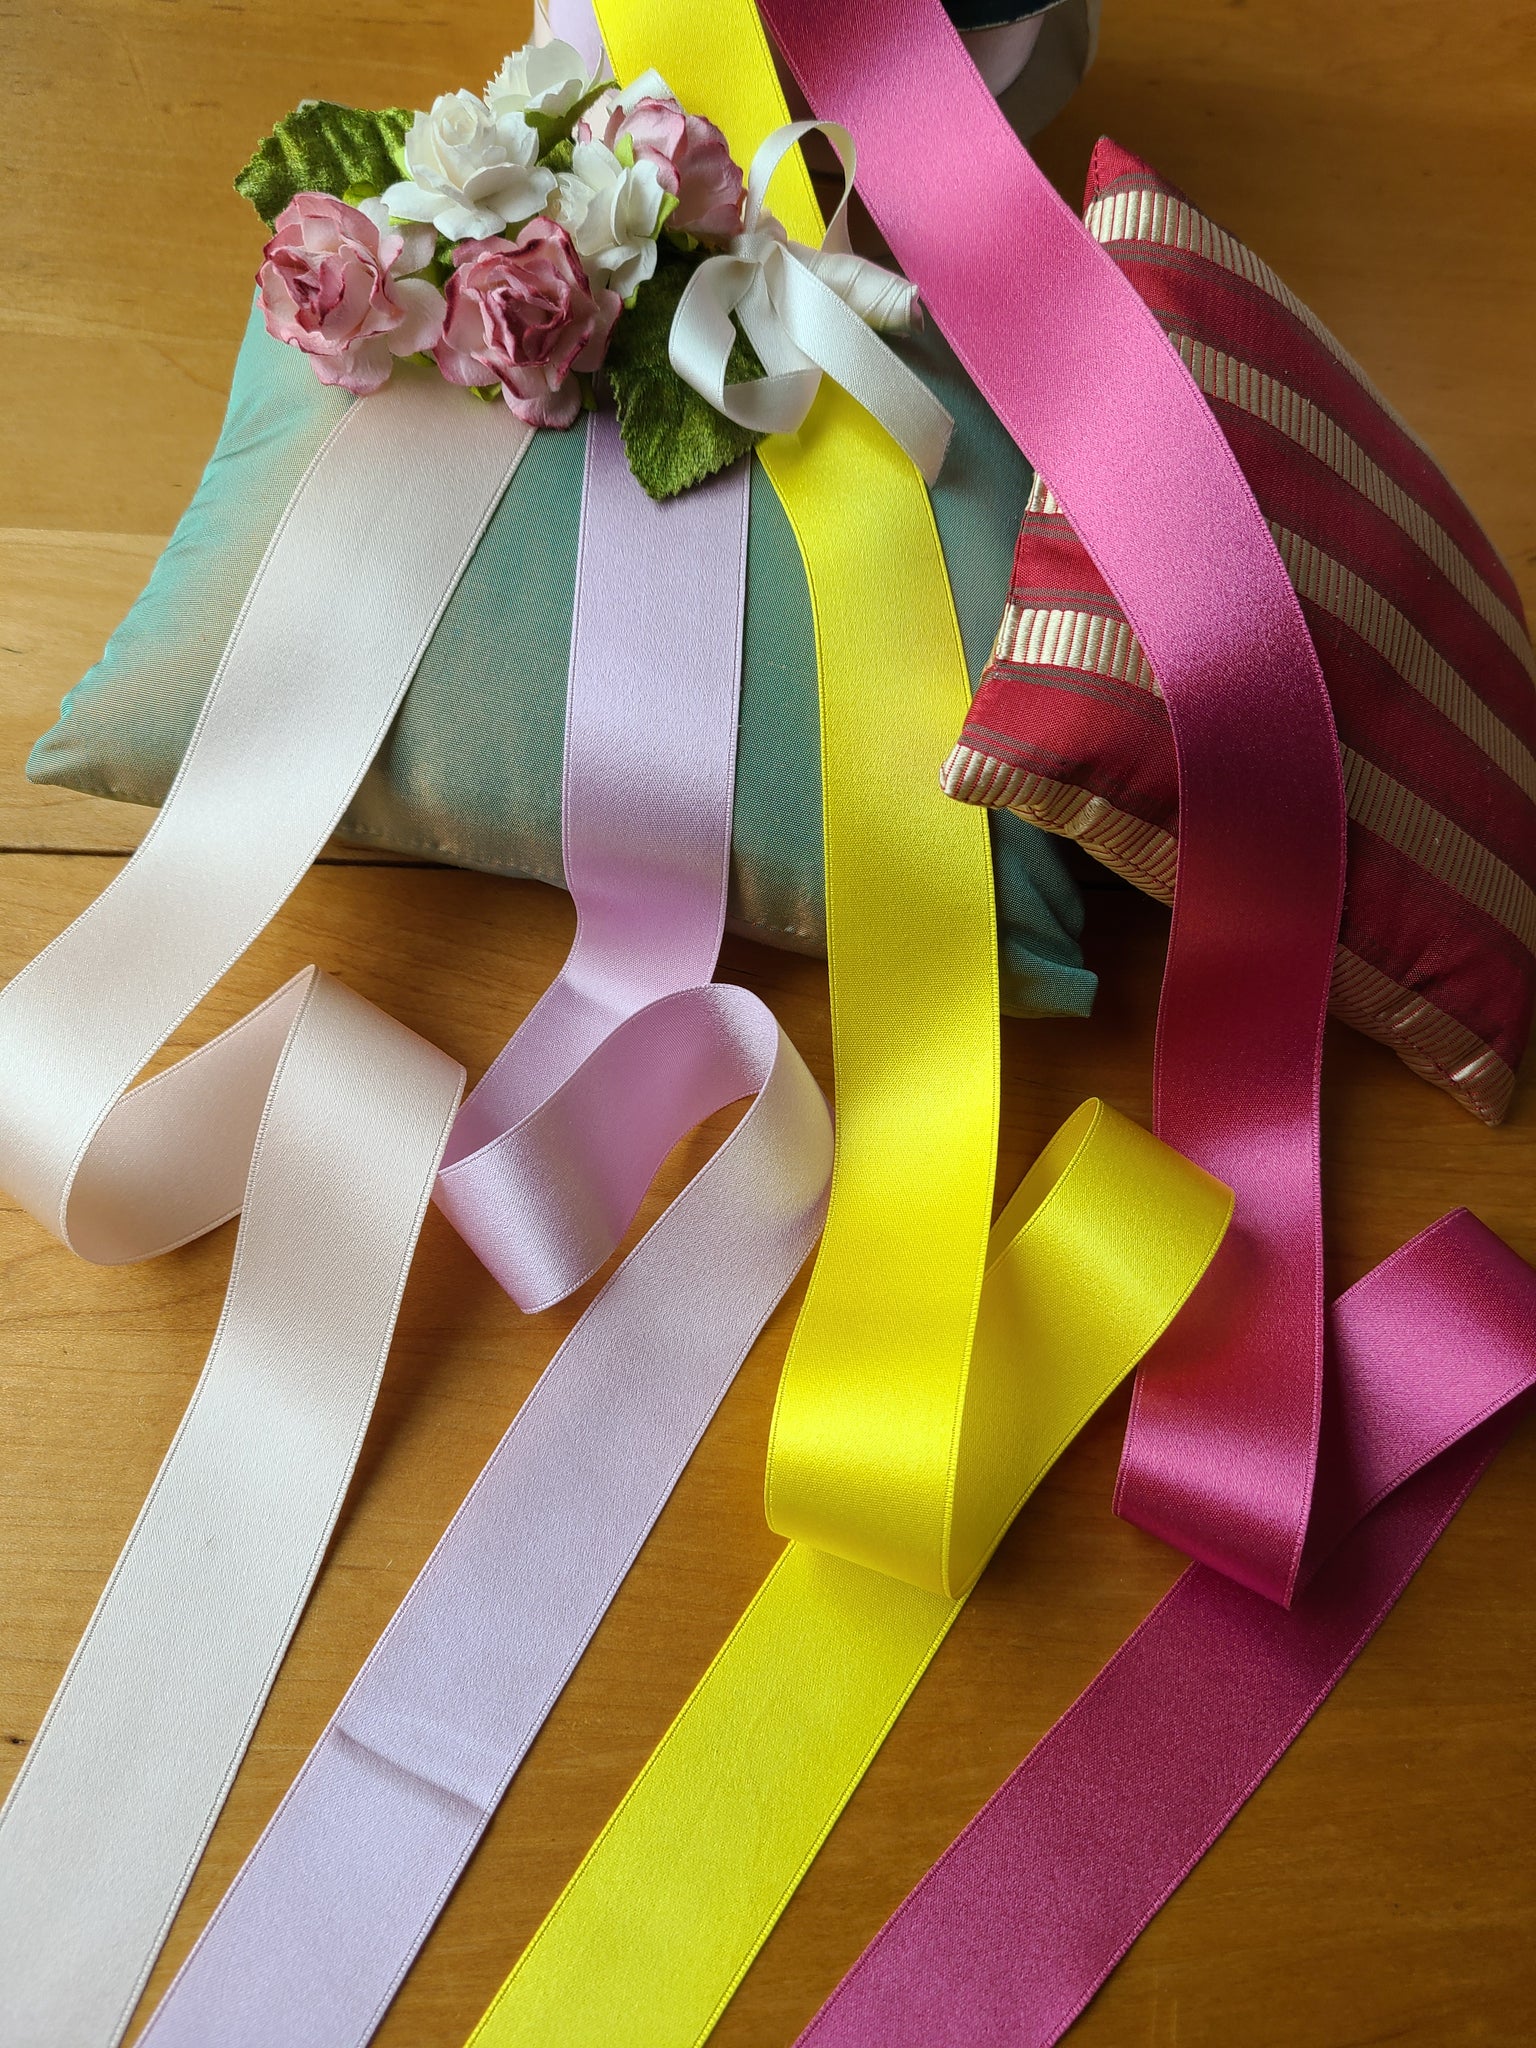 1 Inch Wide Silk Satin Ribbon – At the Sign of the Golden Scissors